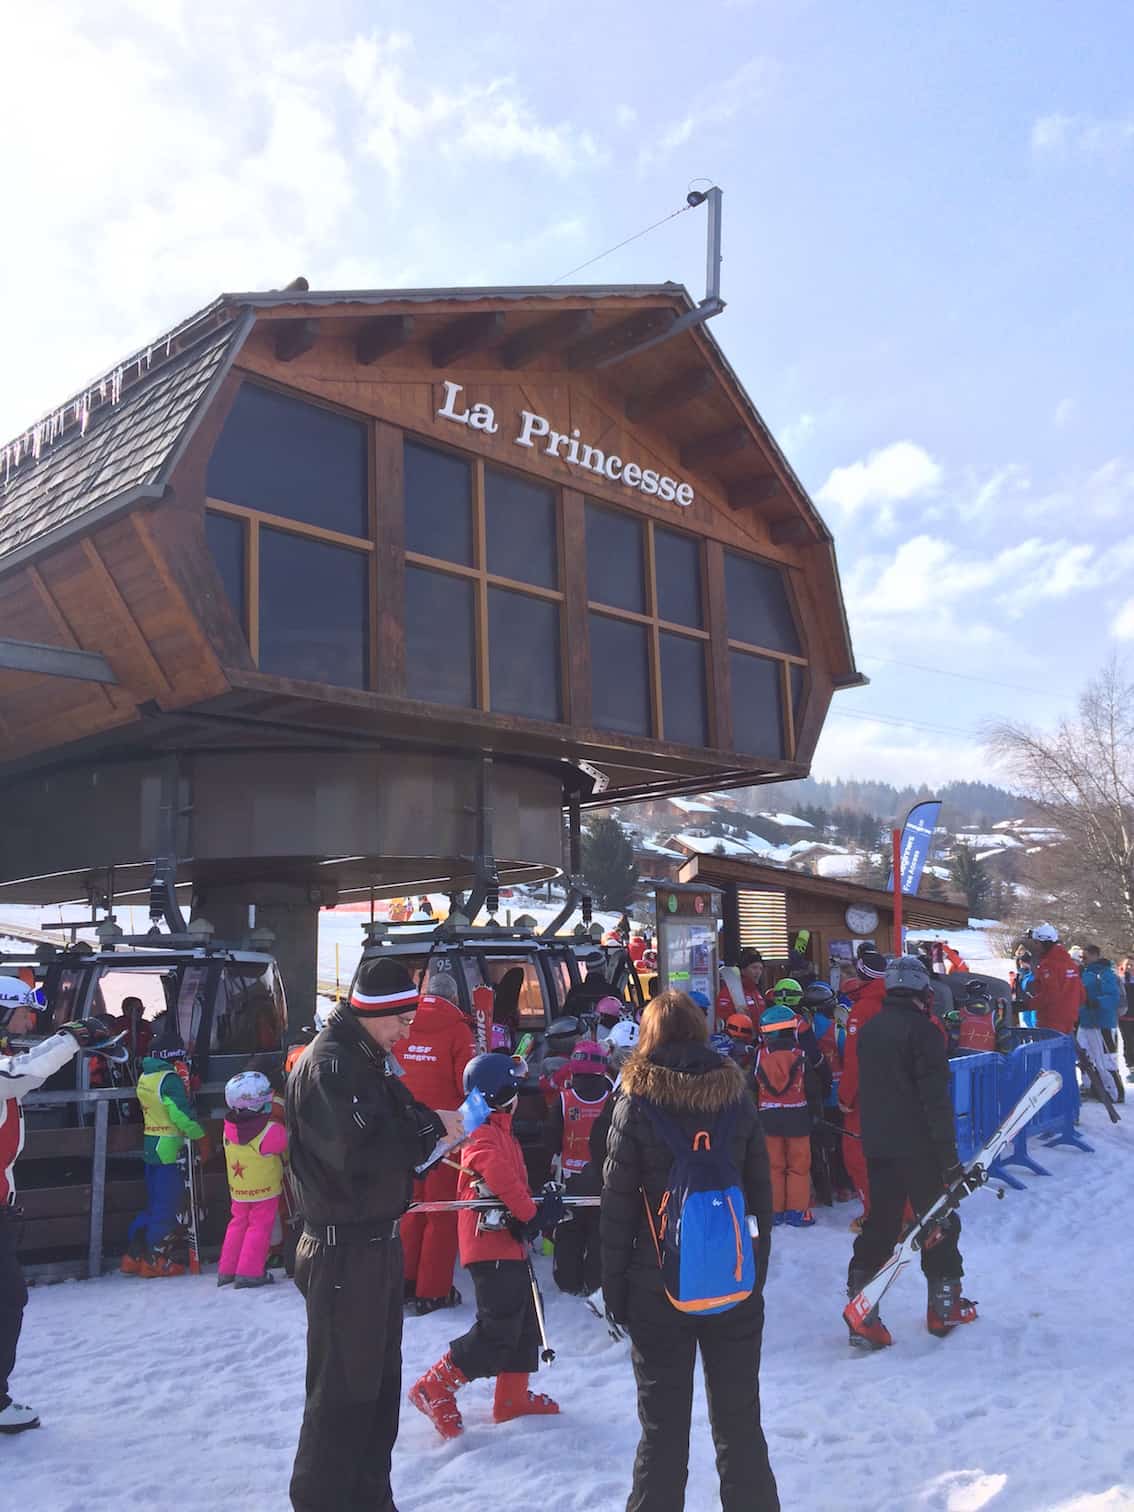 la princesse cable car takes you to the start point of the luge run